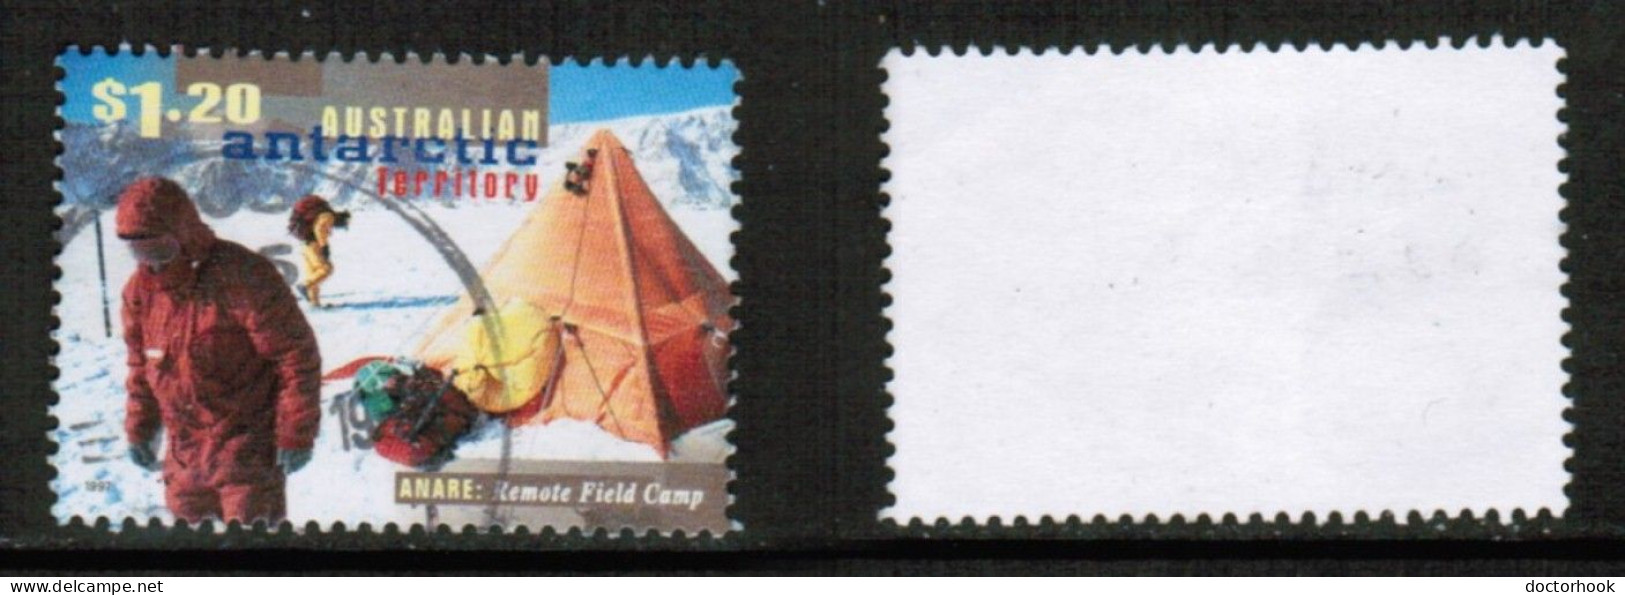 AUSTRALIAN ANTARCTIC TERRITORY   Scott # L 106 USED (CONDITION AS PER SCAN) (Stamp Scan # 930-4) - Oblitérés